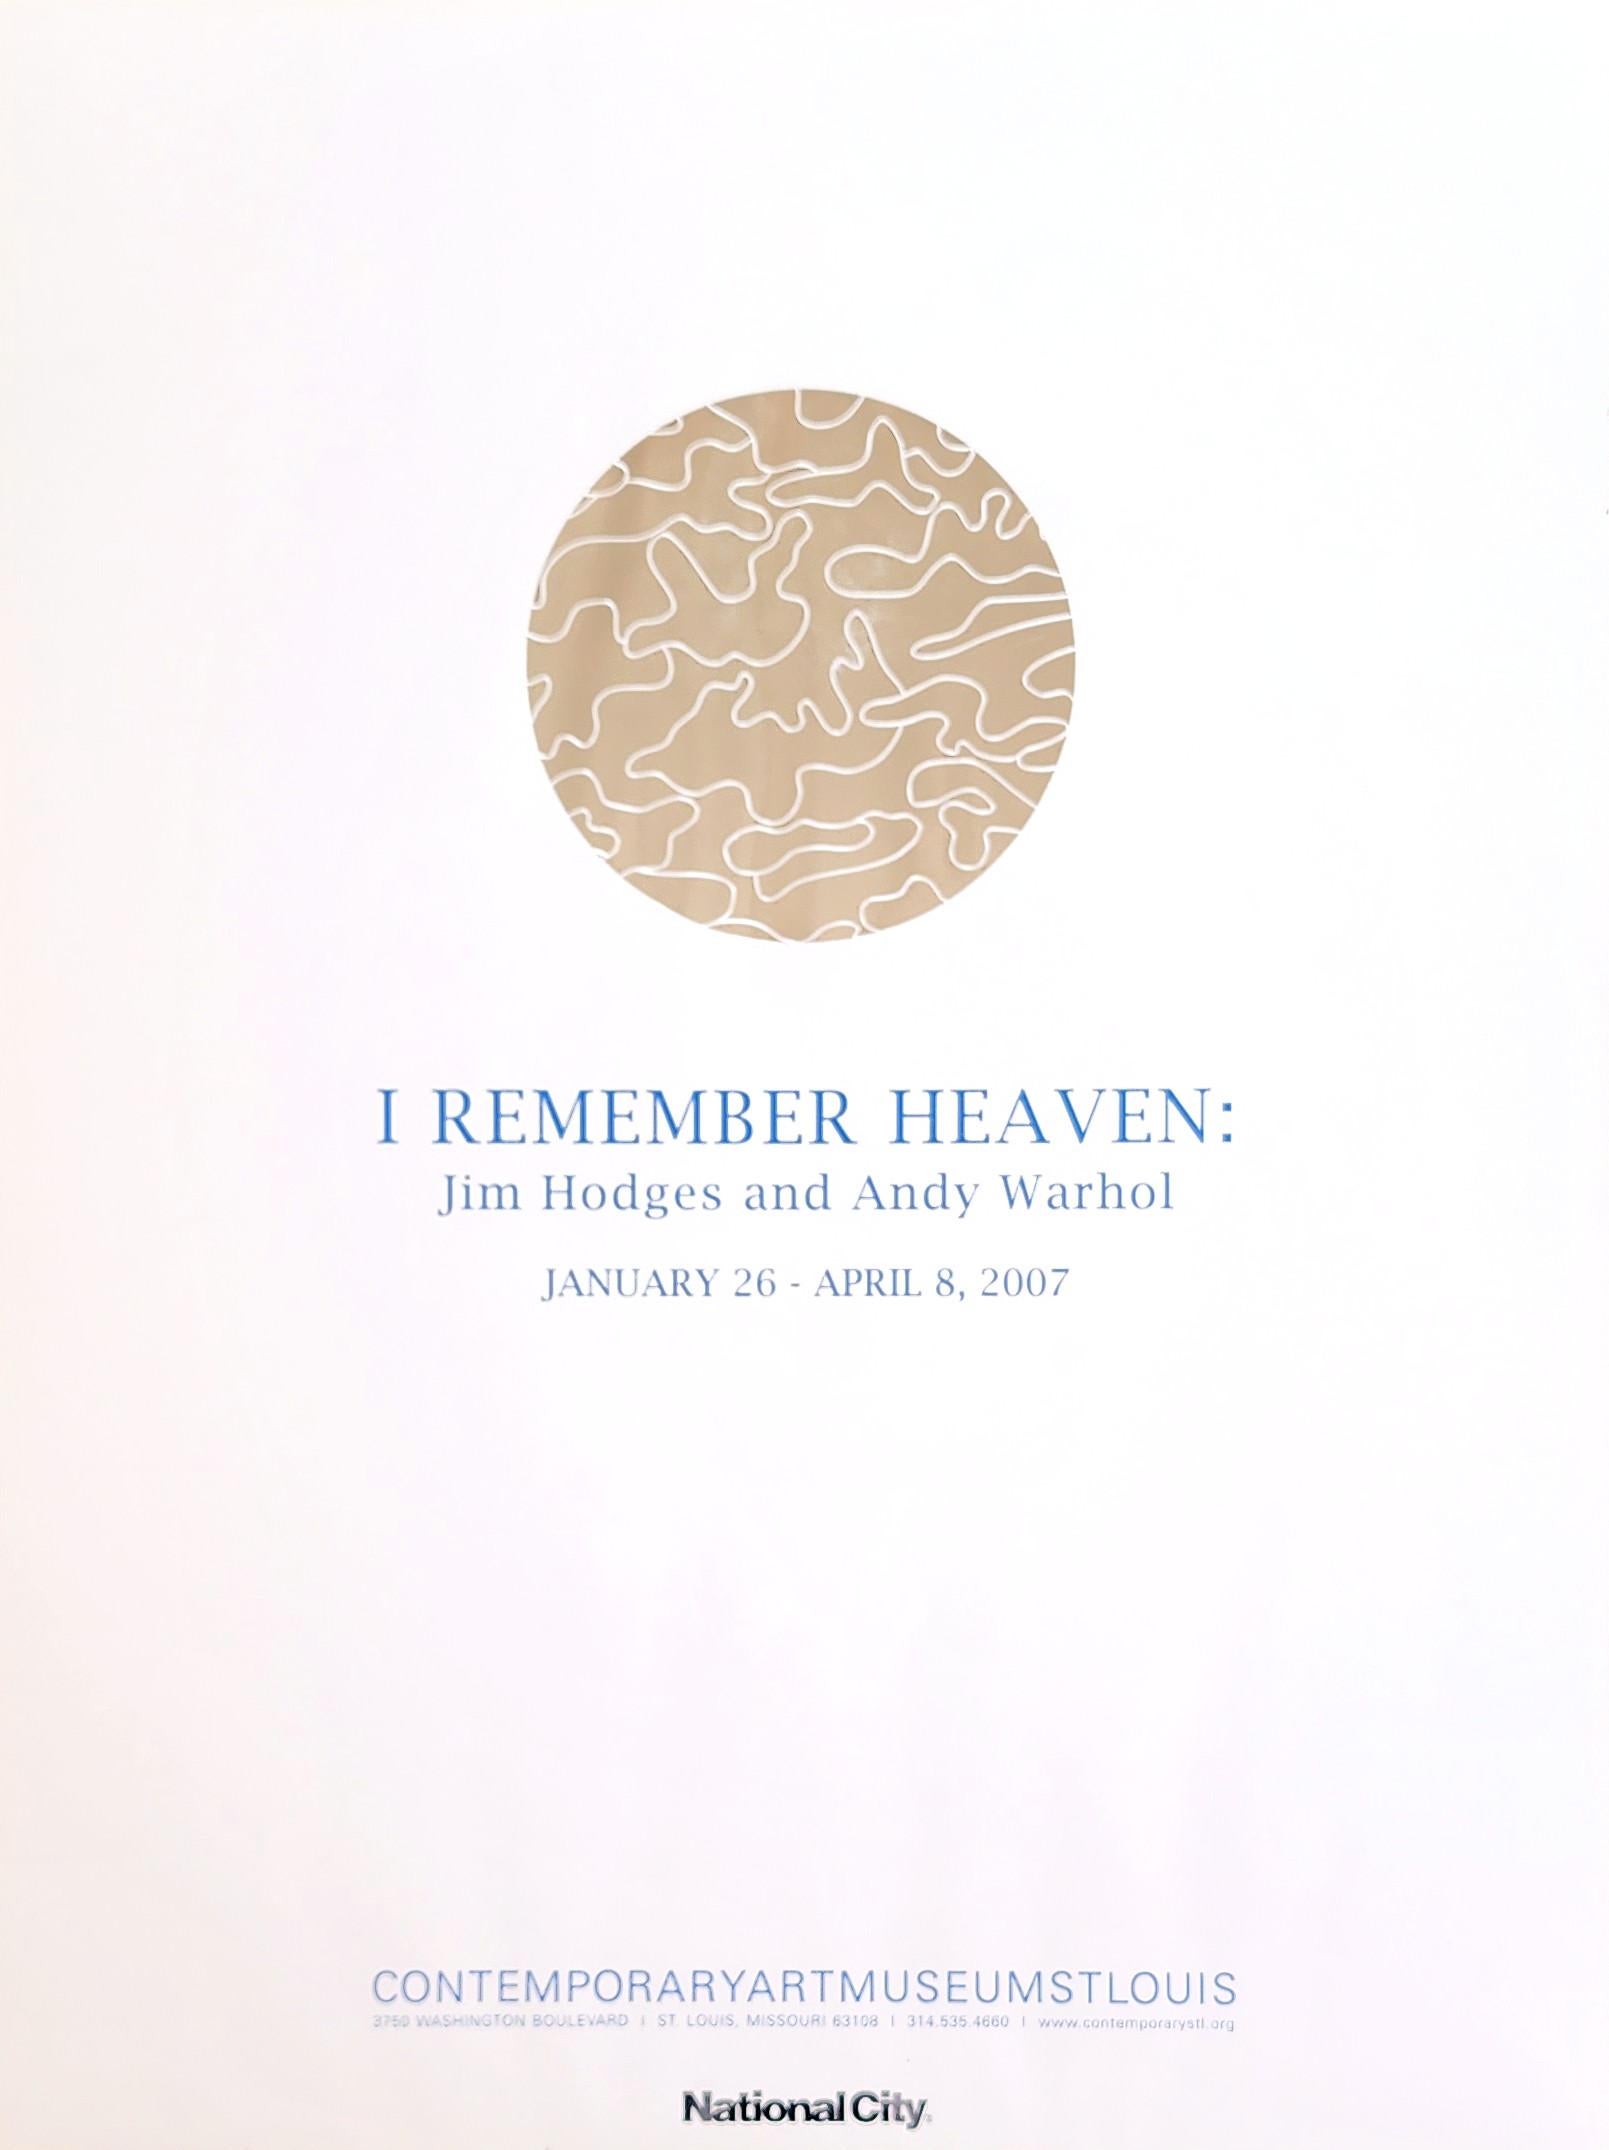 Andy Warhol and Jim Hodges Abstract Print - I Remember Heaven (Minimal, Silver, Foil, Heaven, Contemporary, St. Louis)